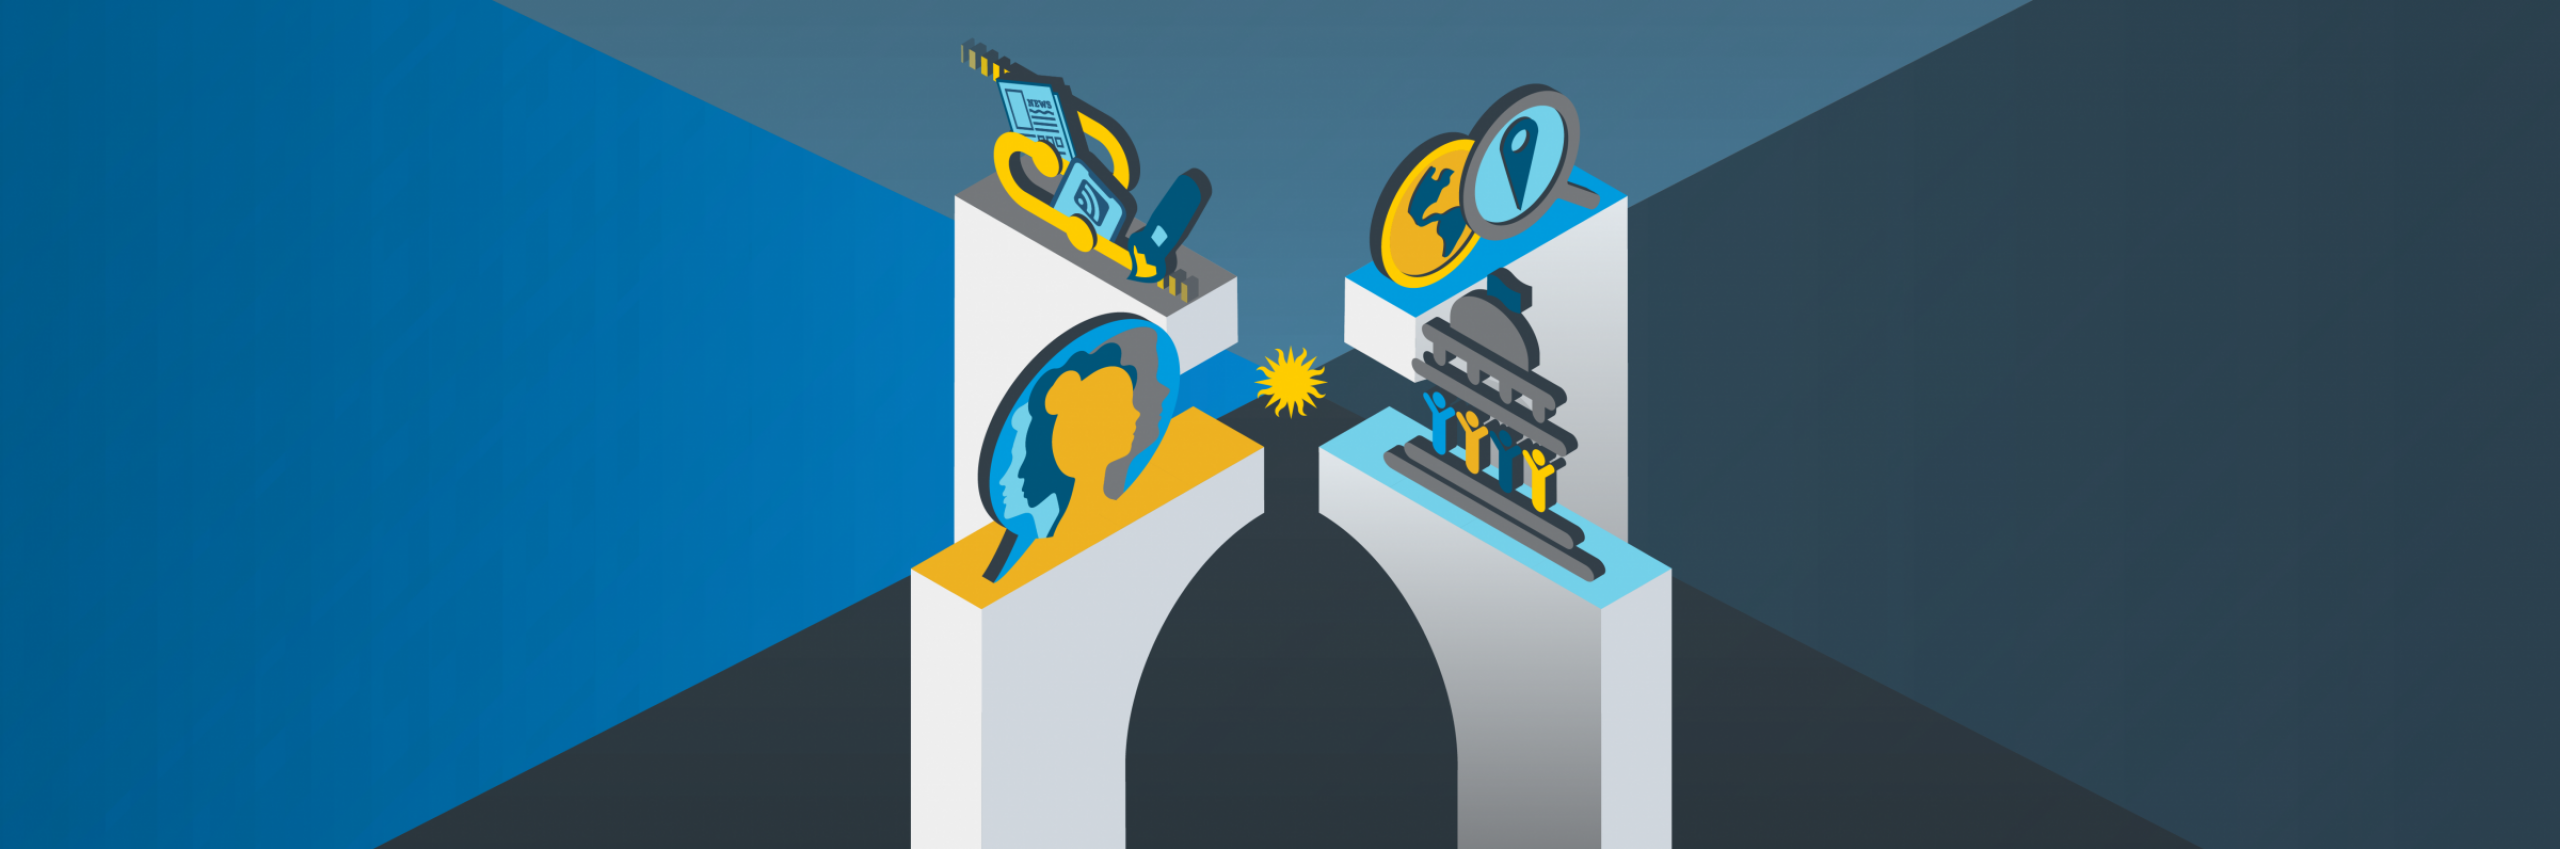 Four isometric columns each with a blue, yellow, and grey icon representing conference session tracks.